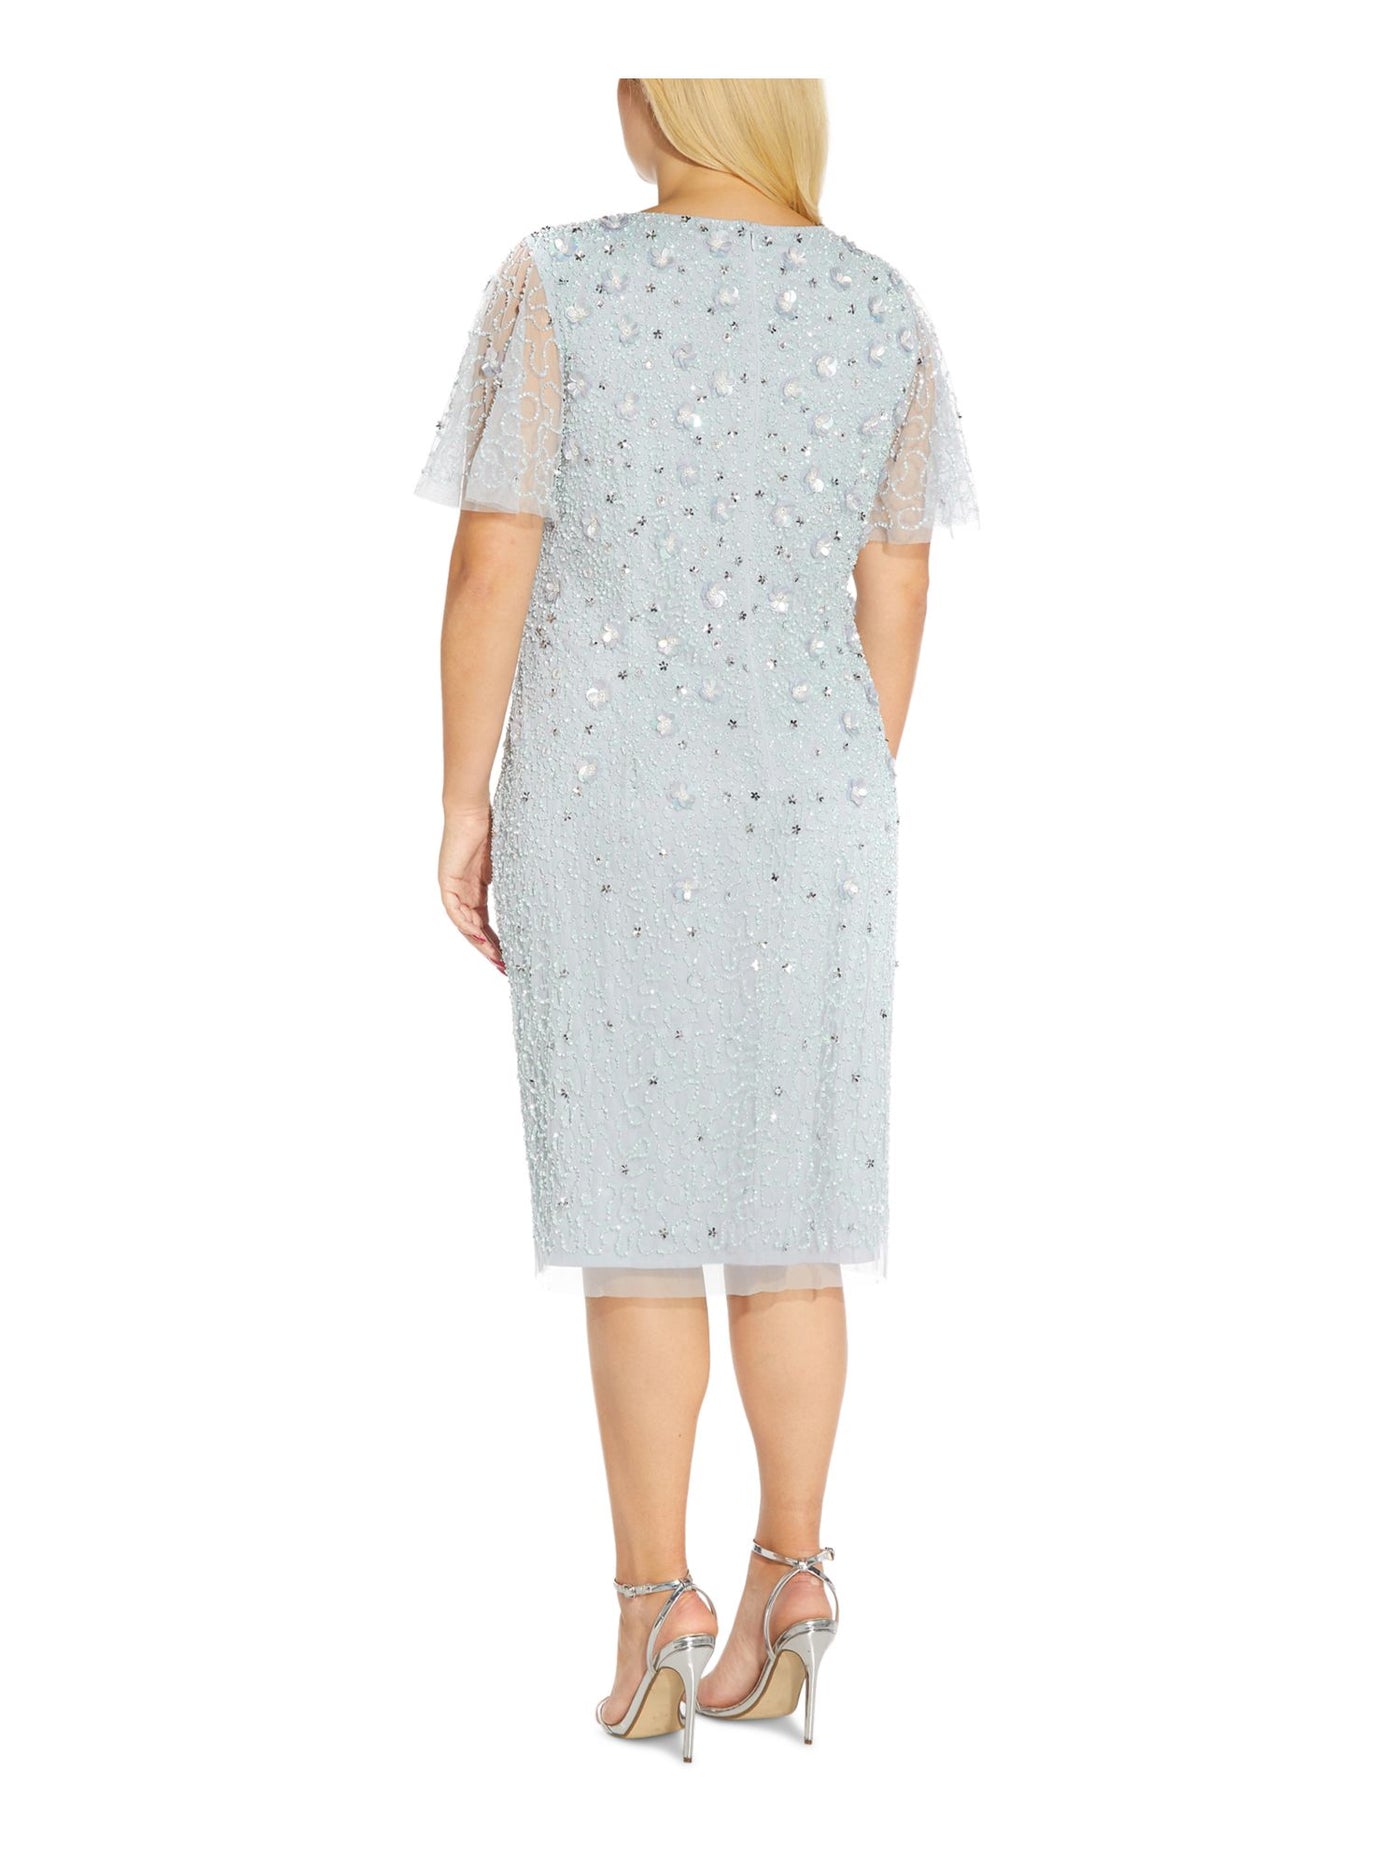 ADRIANNA PAPELL Womens Light Blue Embellished Zippered Lined Short Sleeve V Neck Above The Knee Evening Sheath Dress Plus 14W